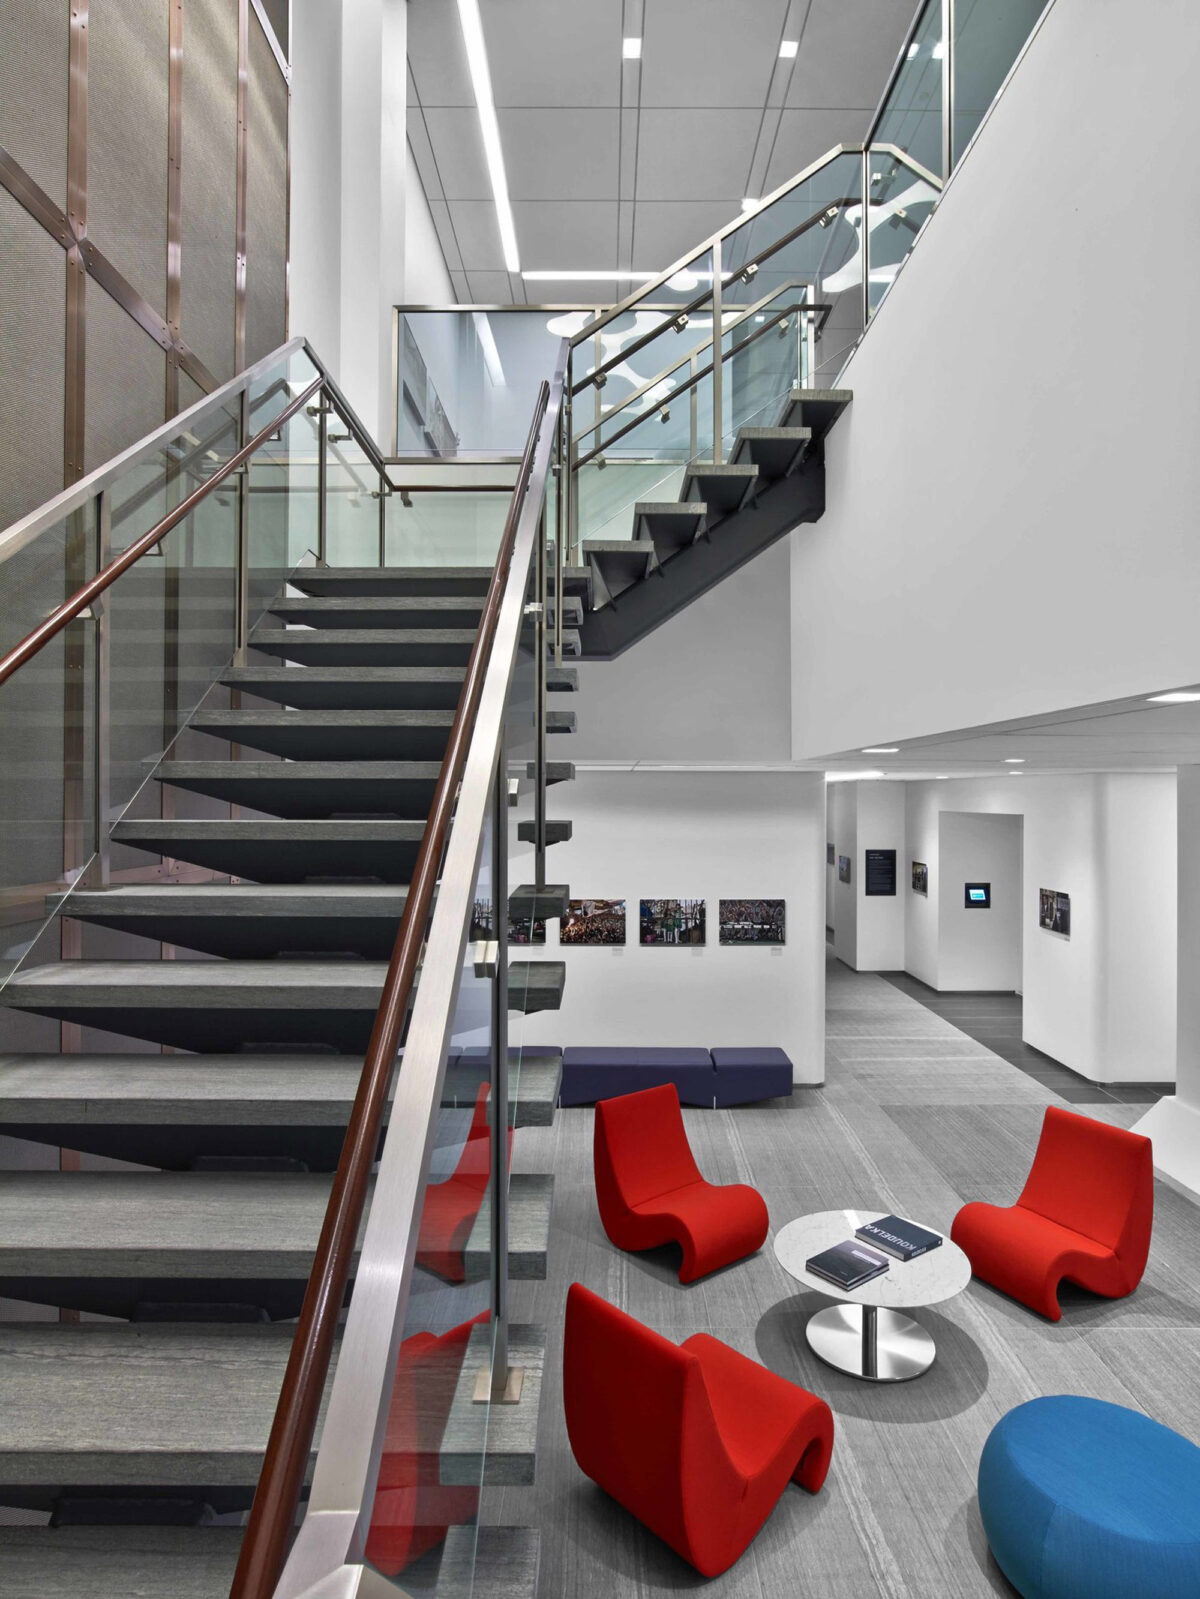 A spacious, modern lobby featuring a floating staircase with glass balustrades and wood accents. Below, vibrant red armchairs and blue ottomans provide a pop of color against the neutral palette of grey walls and white flooring. Artwork is strategically placed along the corridor for visual appeal.